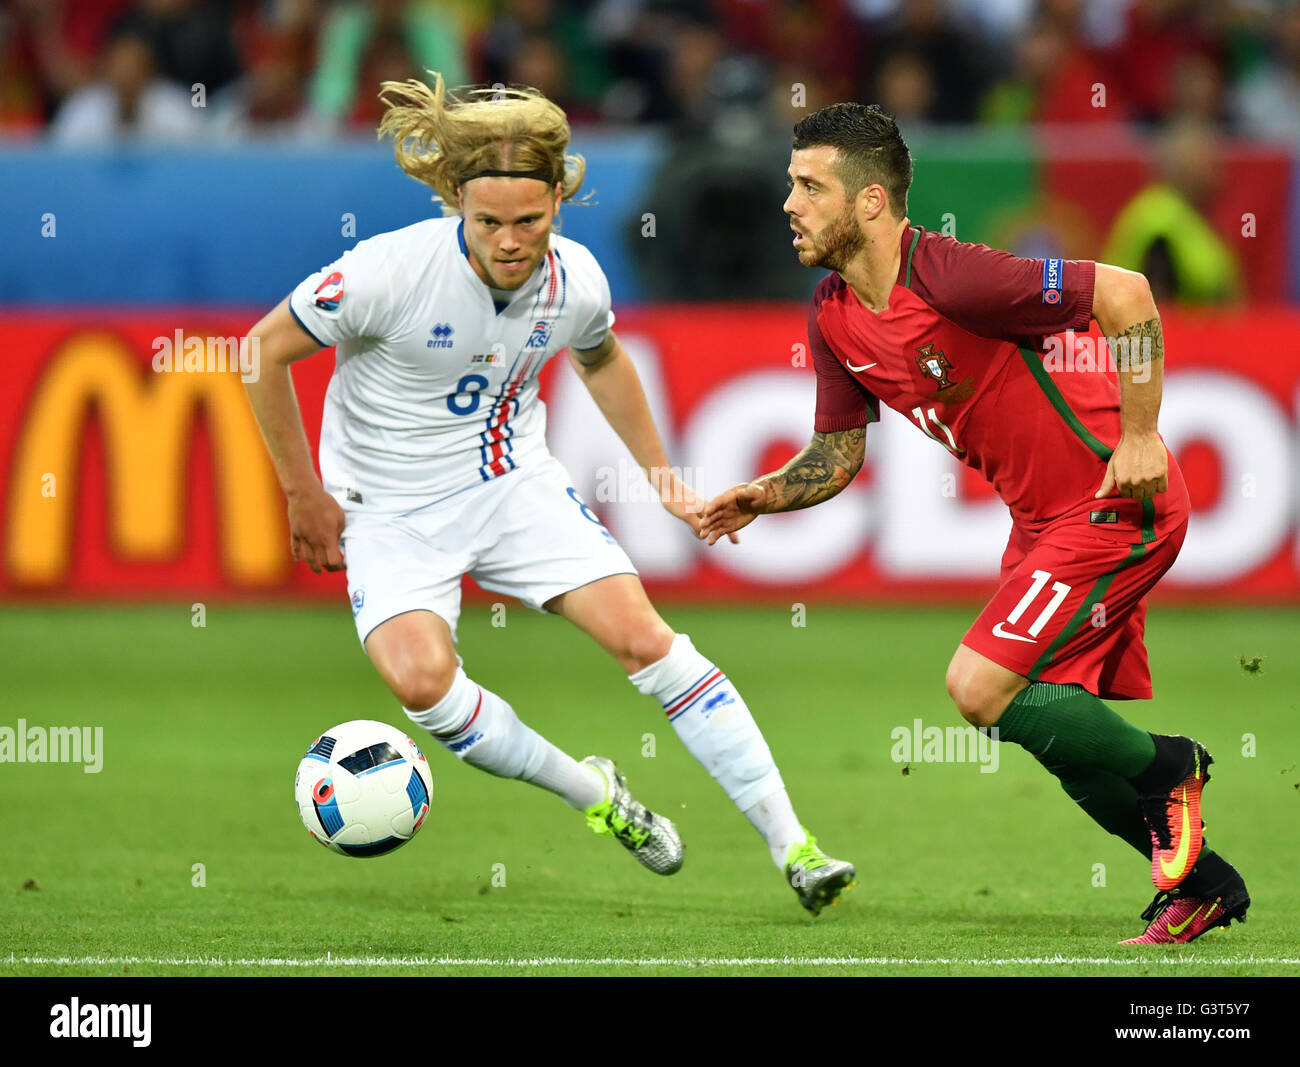 Saint-Etienne, France. 14th June, 2016. Vieirinha (R) of Portugal and Birkir Bjarnason of Iceland vie for the ball during the UEFA Euro 2016 Group F soccer match Portugal vs. Iceland at Stade Geoffroy Guichard in Saint-Etienne, France, 14 June 2016. Photo: Uwe Anspach/dpa/Alamy Live News Stock Photo